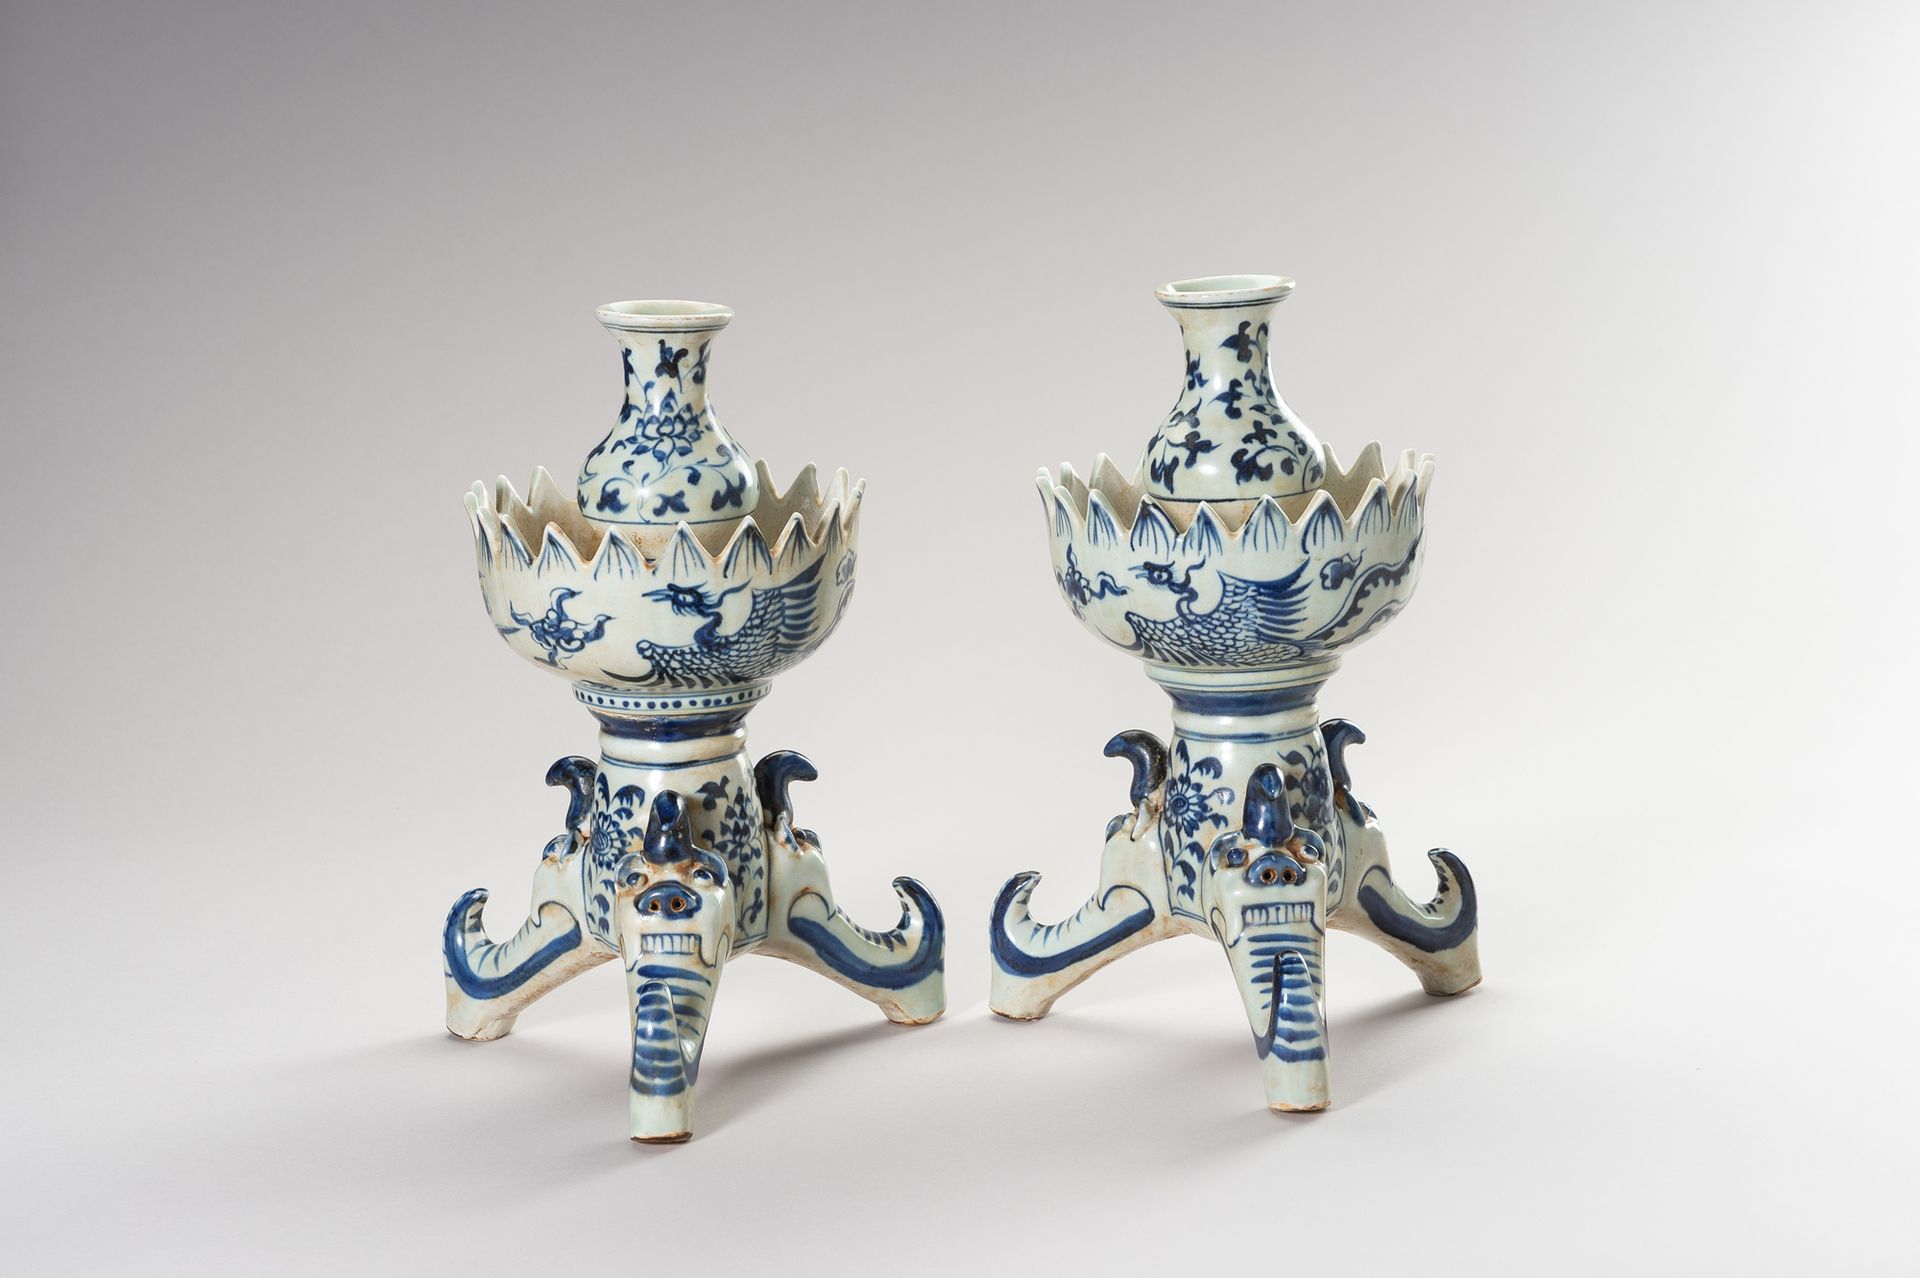 A PAIR OF MING STYLE BLUE AND WHITE CANDLE HOLDERS 一对明式青花烛台
中国，清末（1644-1912）至民国时&hellip;